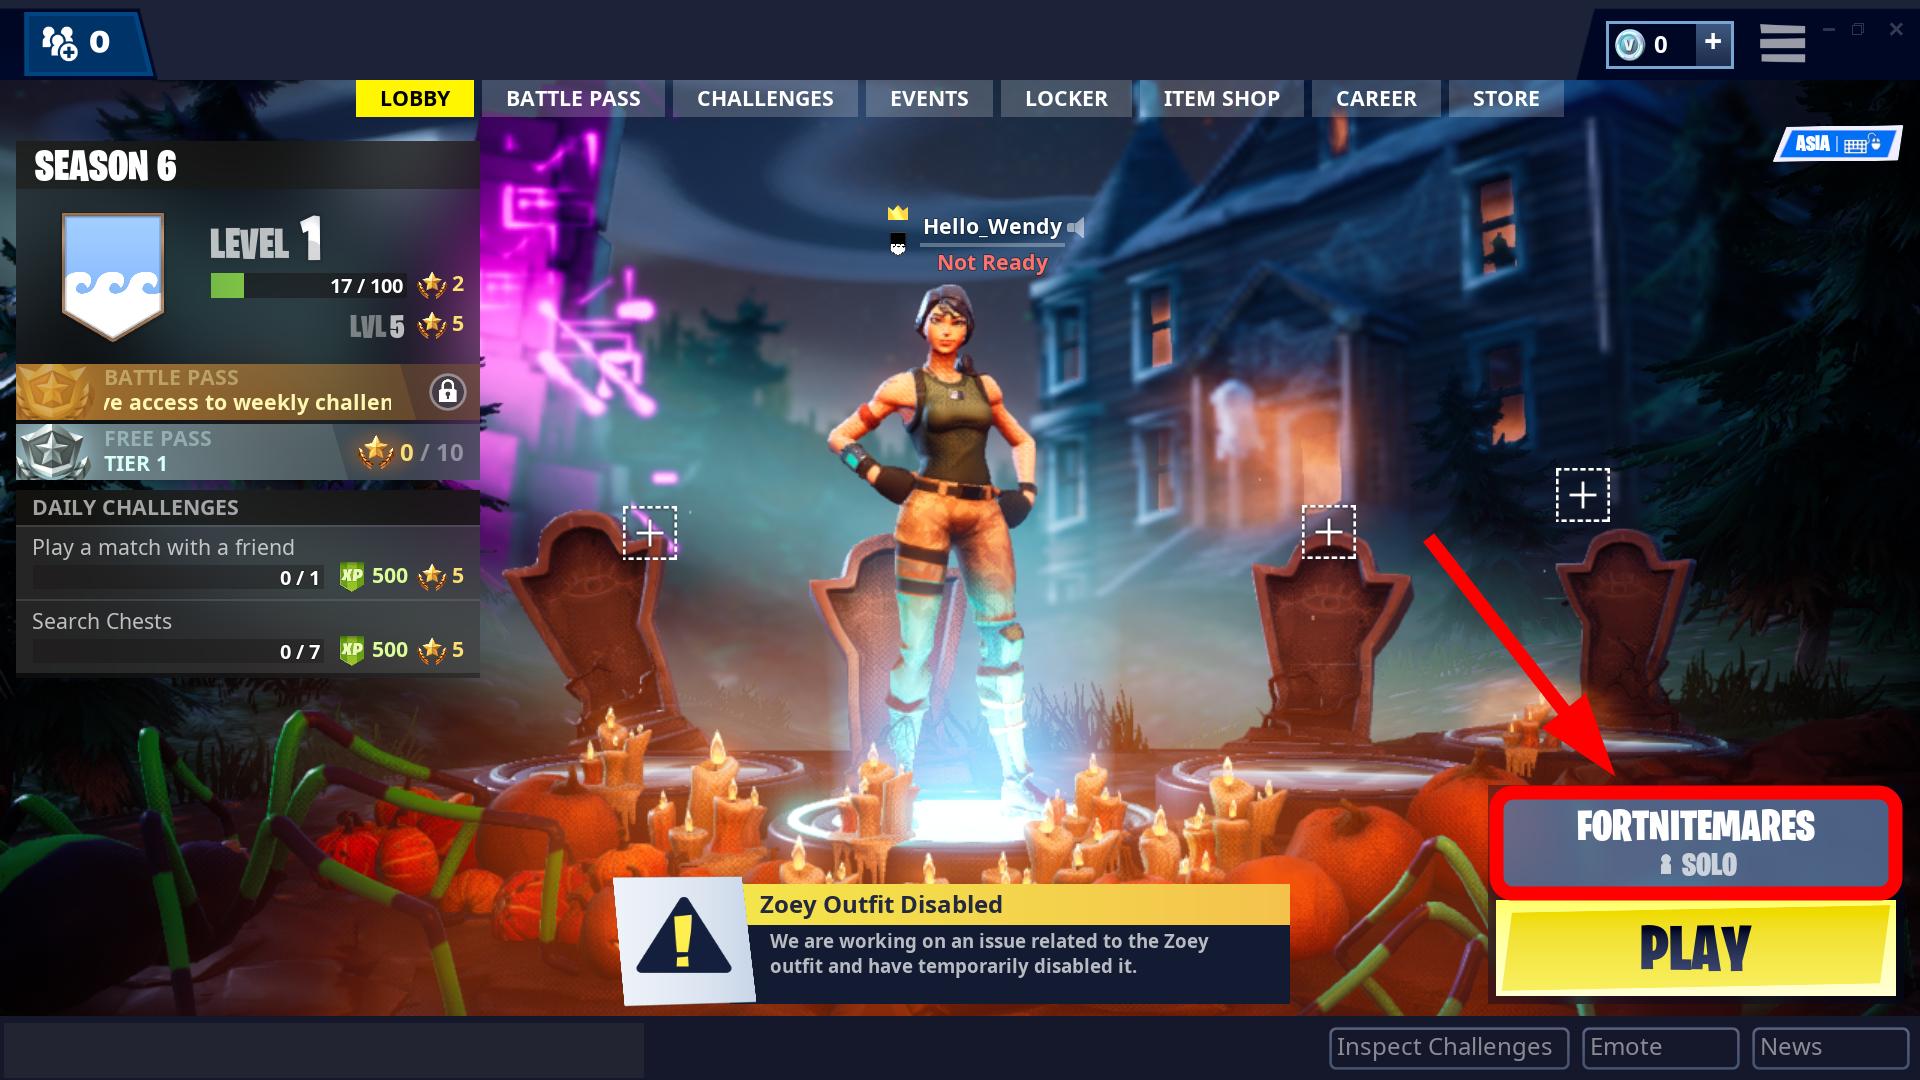 How To Start Fortnite Over How To Play Fortnite On Pc Easy Guide For Beginners Driver Easy